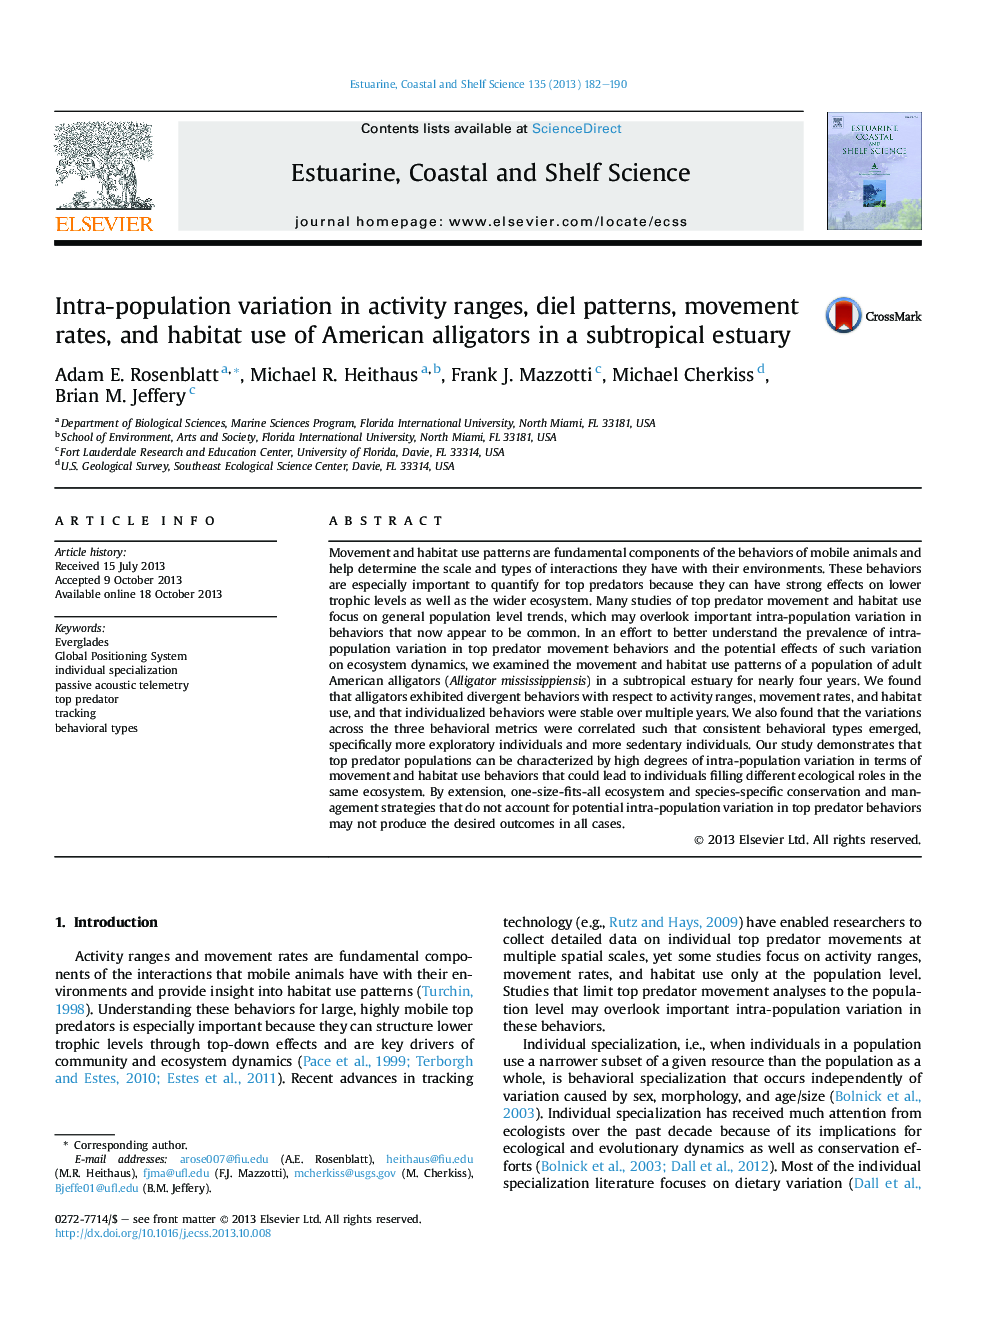 Intra-population variation in activity ranges, diel patterns, movement rates, and habitat use of American alligators in a subtropical estuary